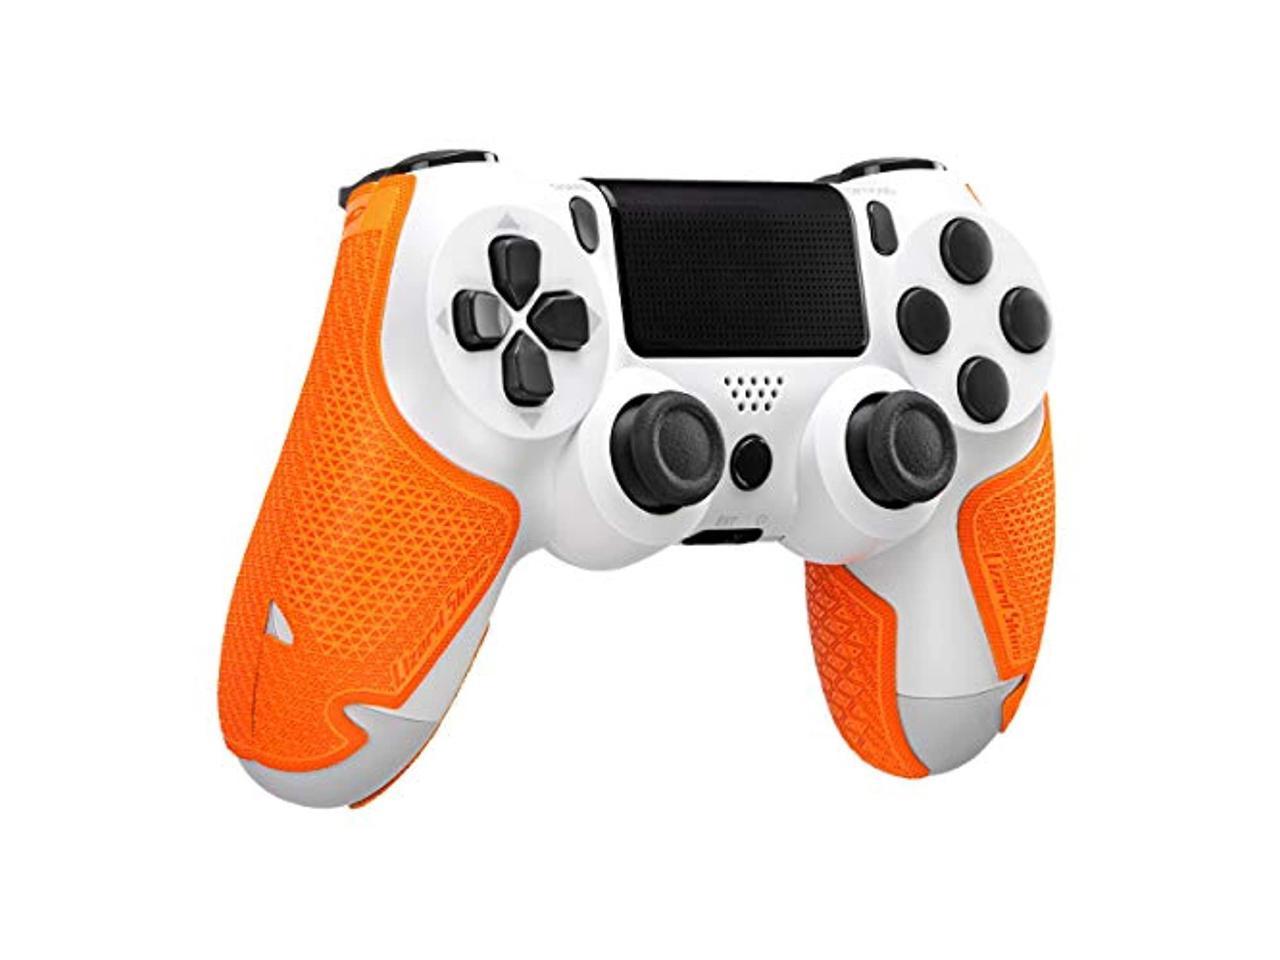 Omvendt regeringstid bronze lizard skins dsp controller grip for ps4 controllers - ps4 gaming grip -  playstation 4 compatible grip 0.5mm thickness - pre cut pieces - easy to  install - 10 colors (tangerine) - Newegg.com